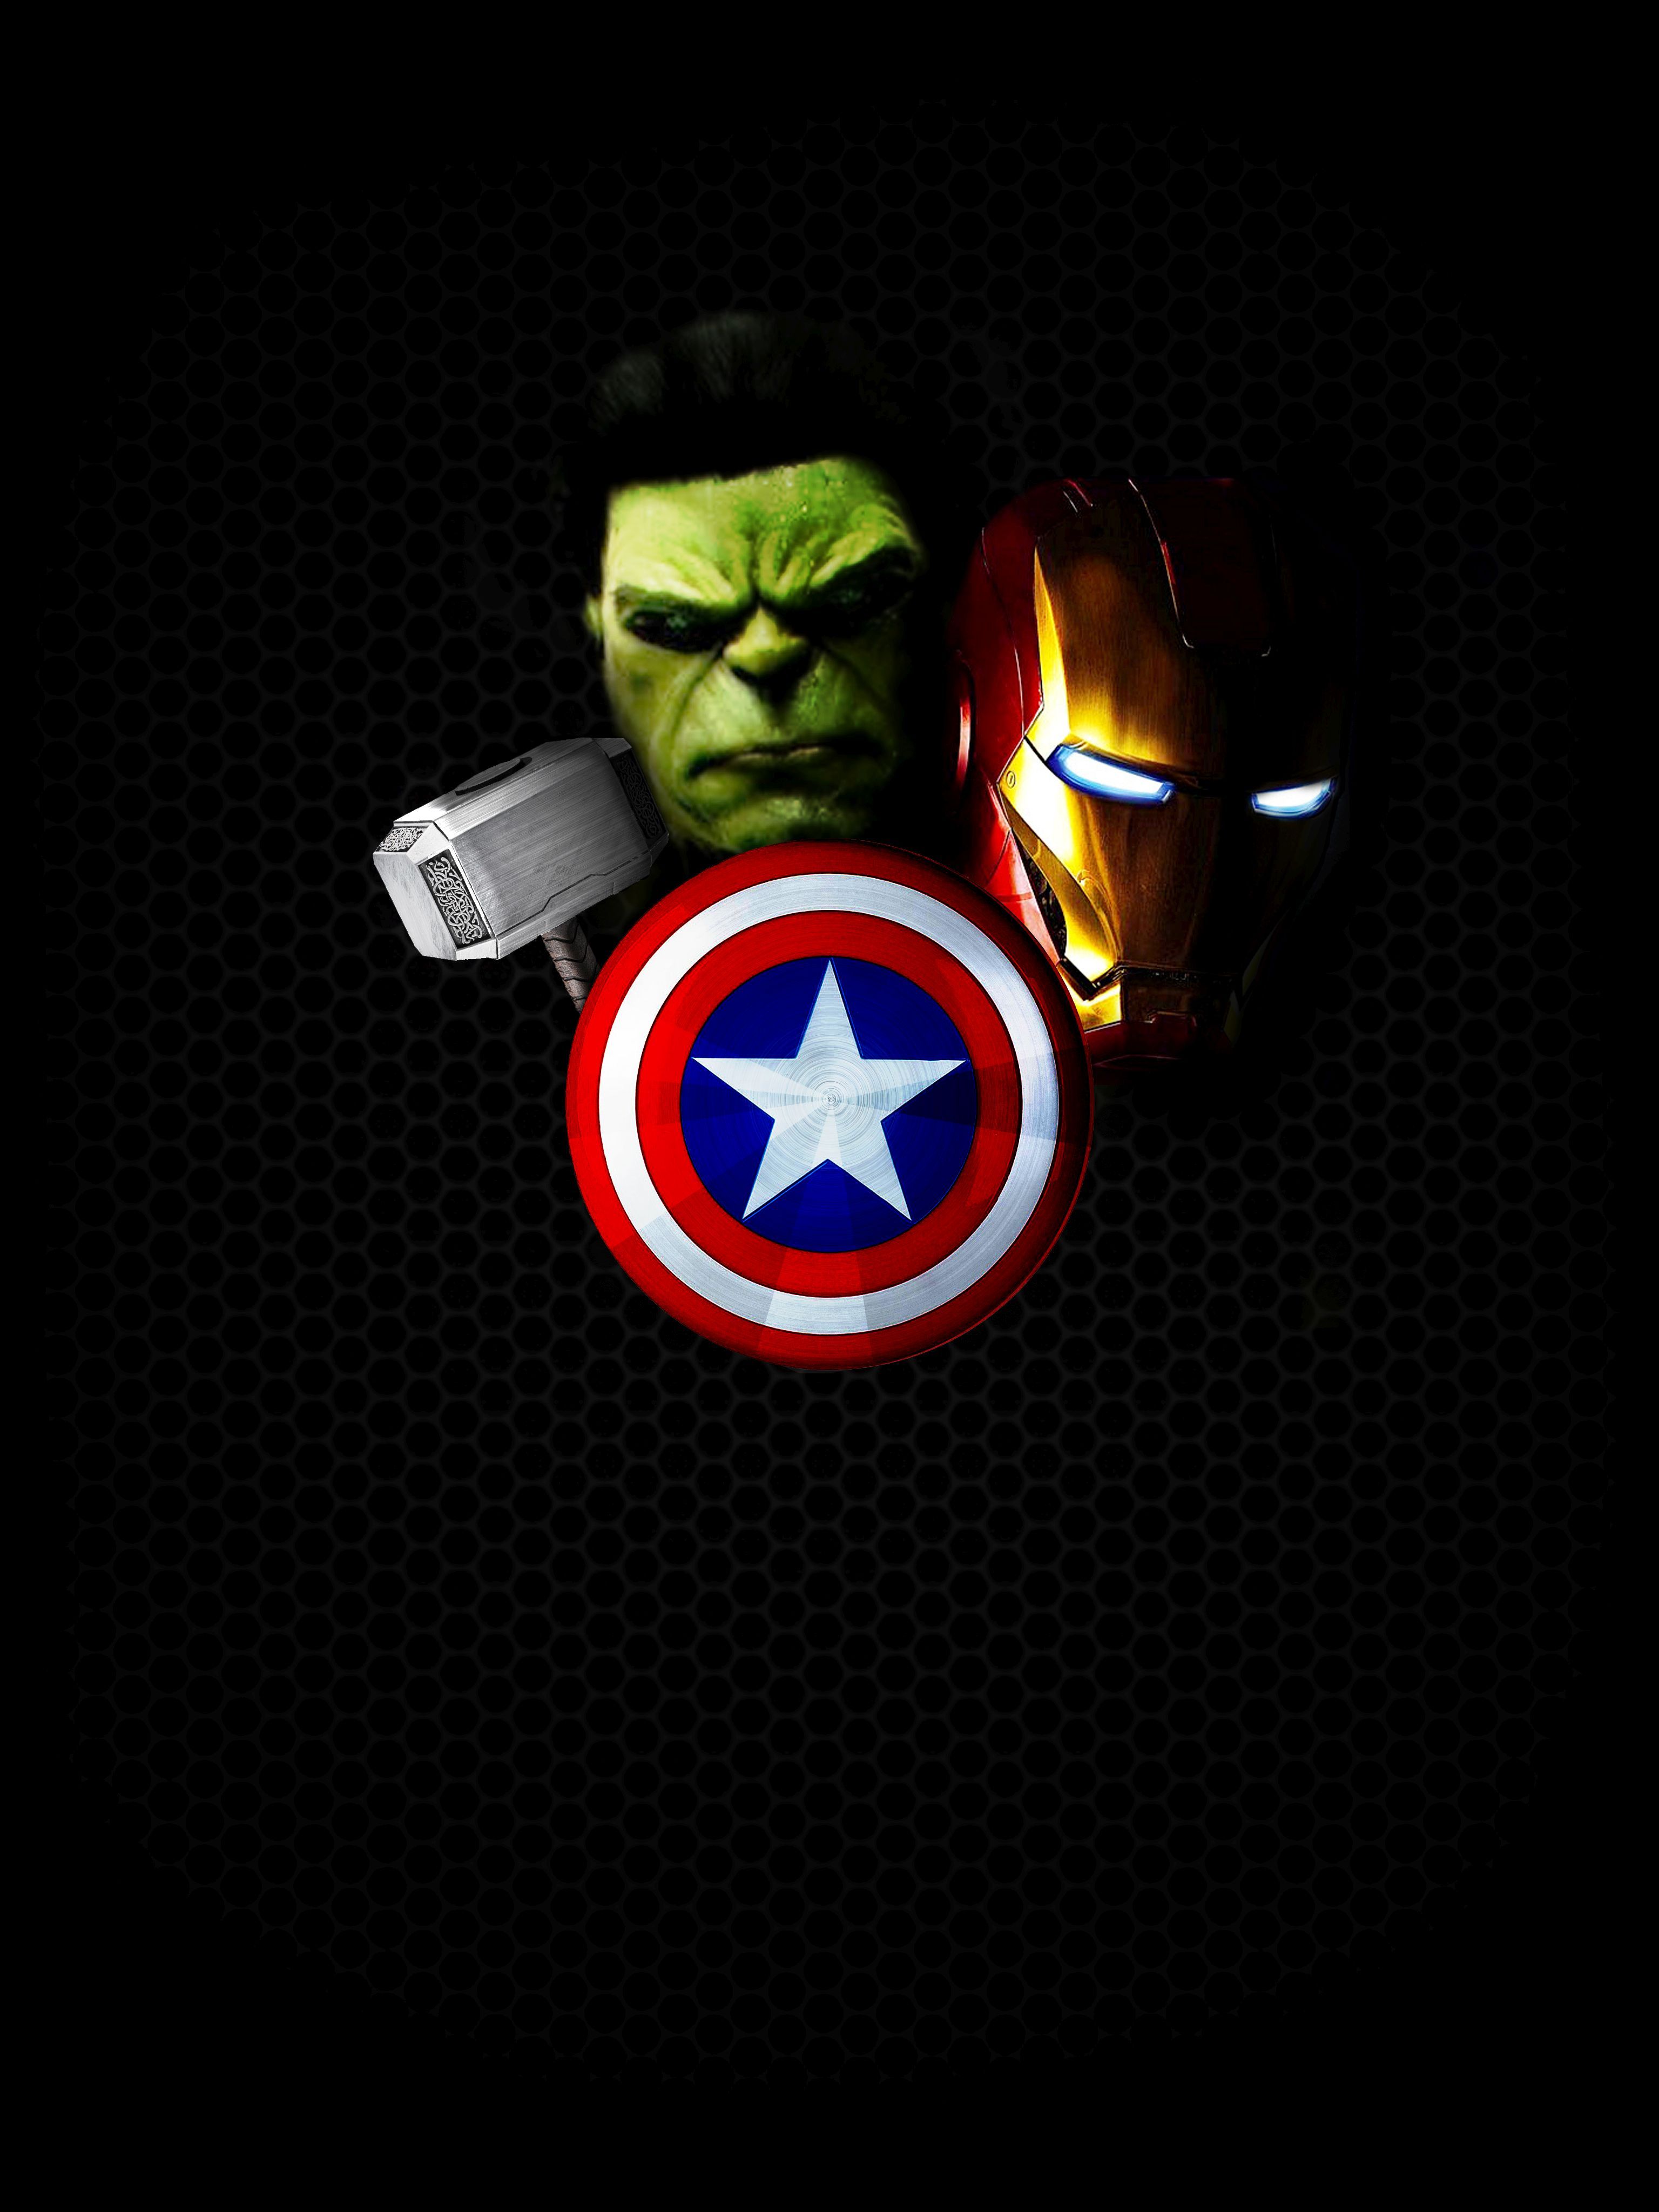 100+] Avengers Android Wallpapers | Wallpapers.com